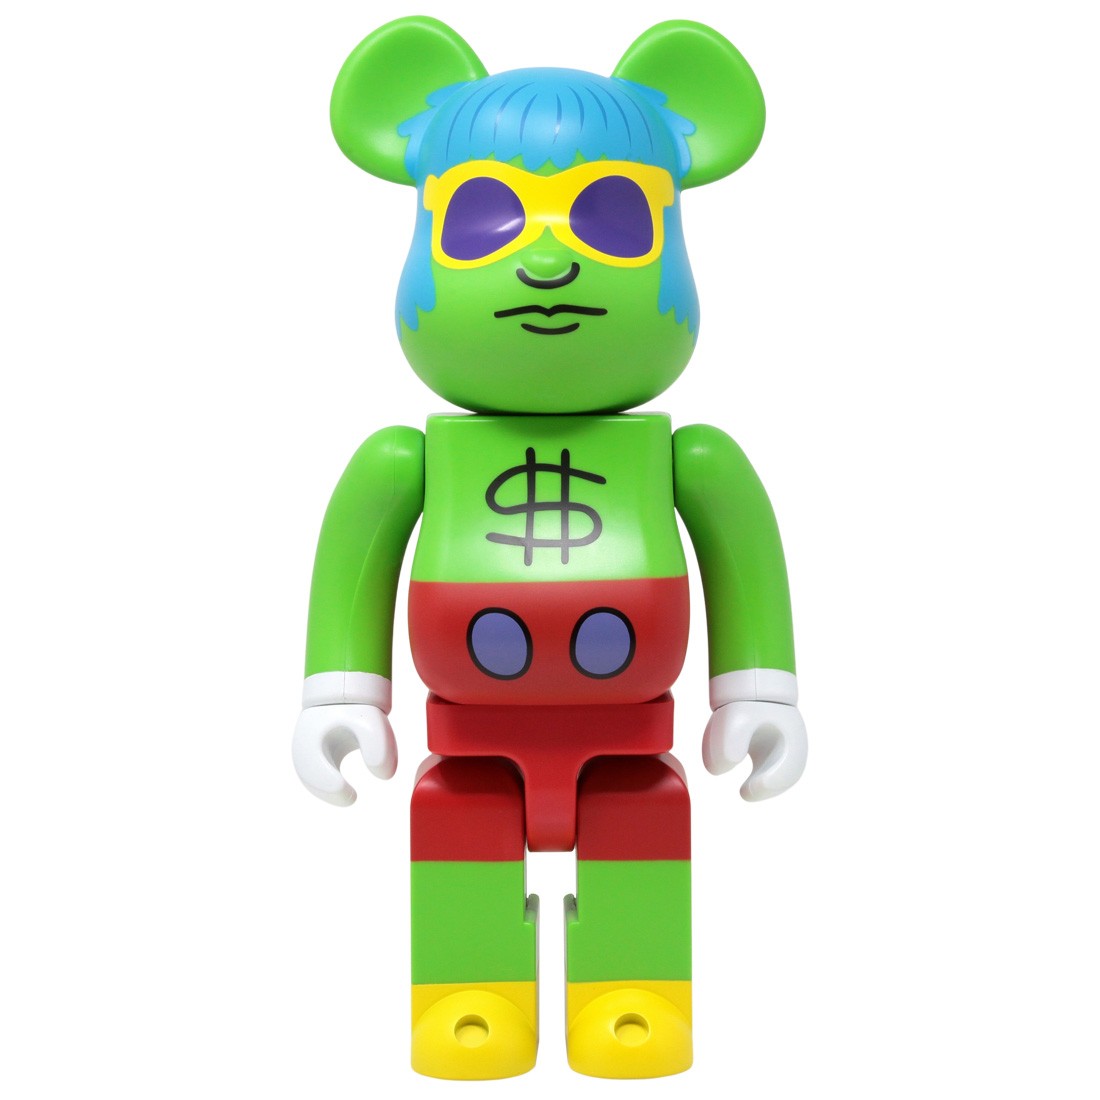 Medicom Keith Haring Andy Mouse 400% Bearbrick Figure (green)